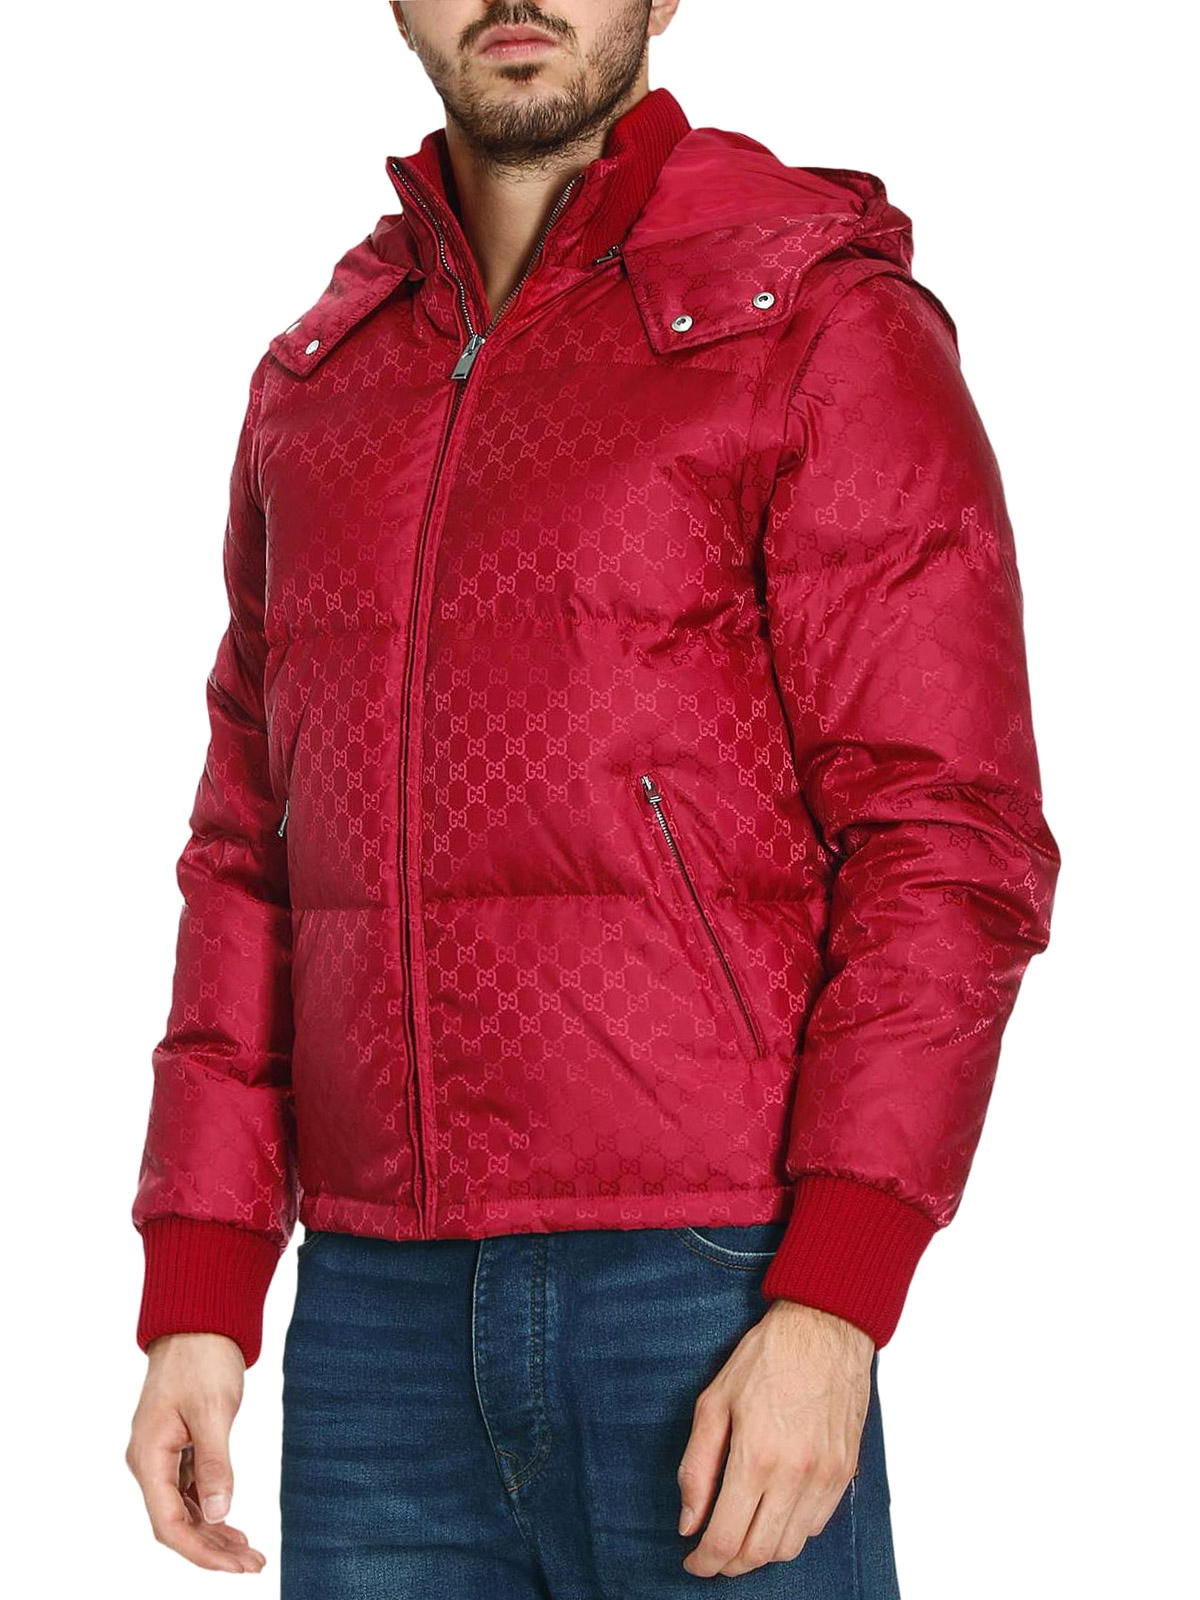 gucci red puffer jacket